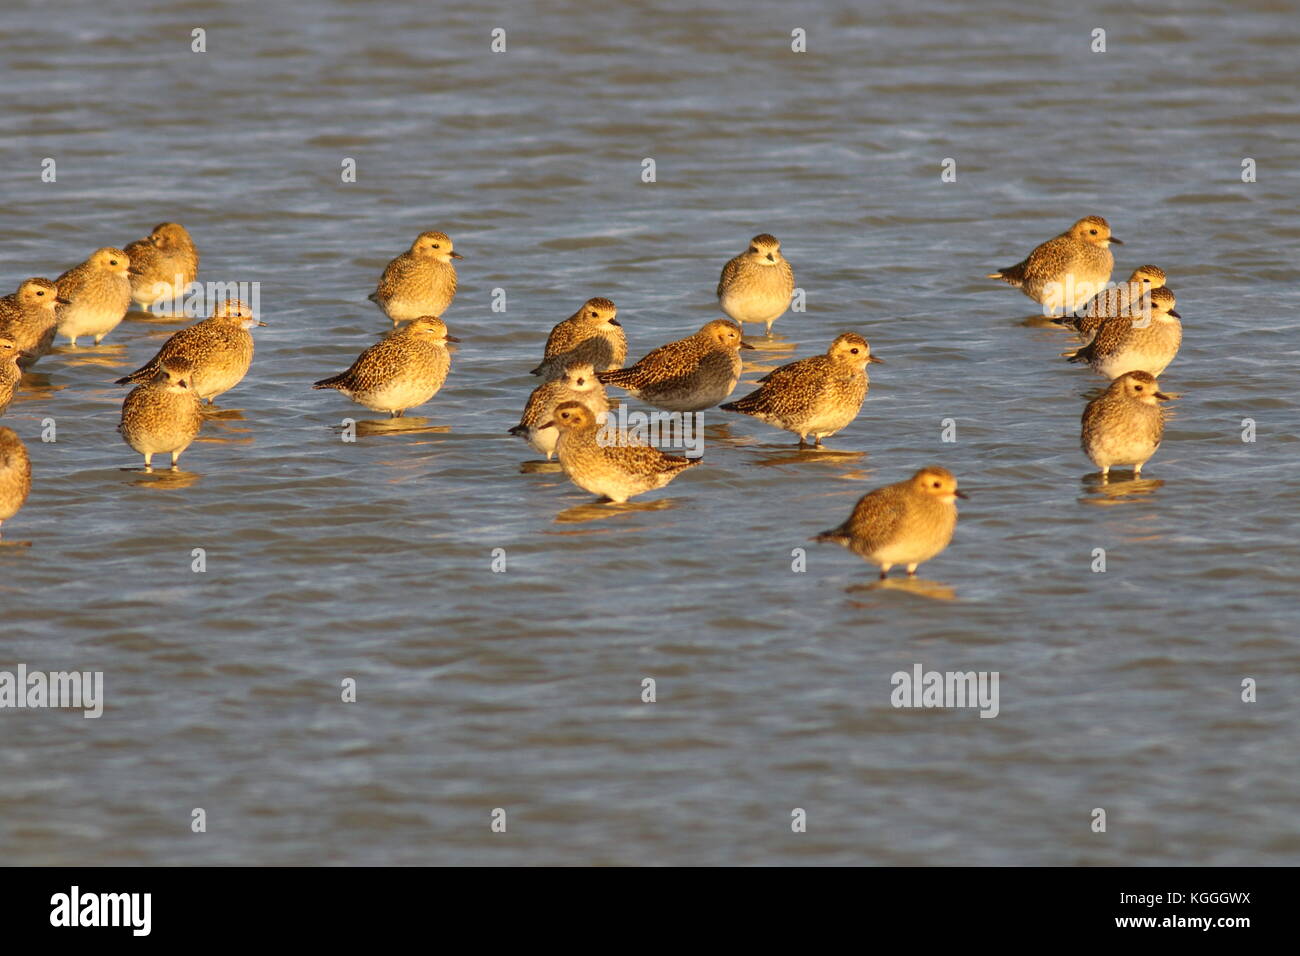 Golden Plovers standing in water, resting during October in their winter plumage at Oare Marsh Kent UK. Latin name Pluvialis apricaria. Stock Photo